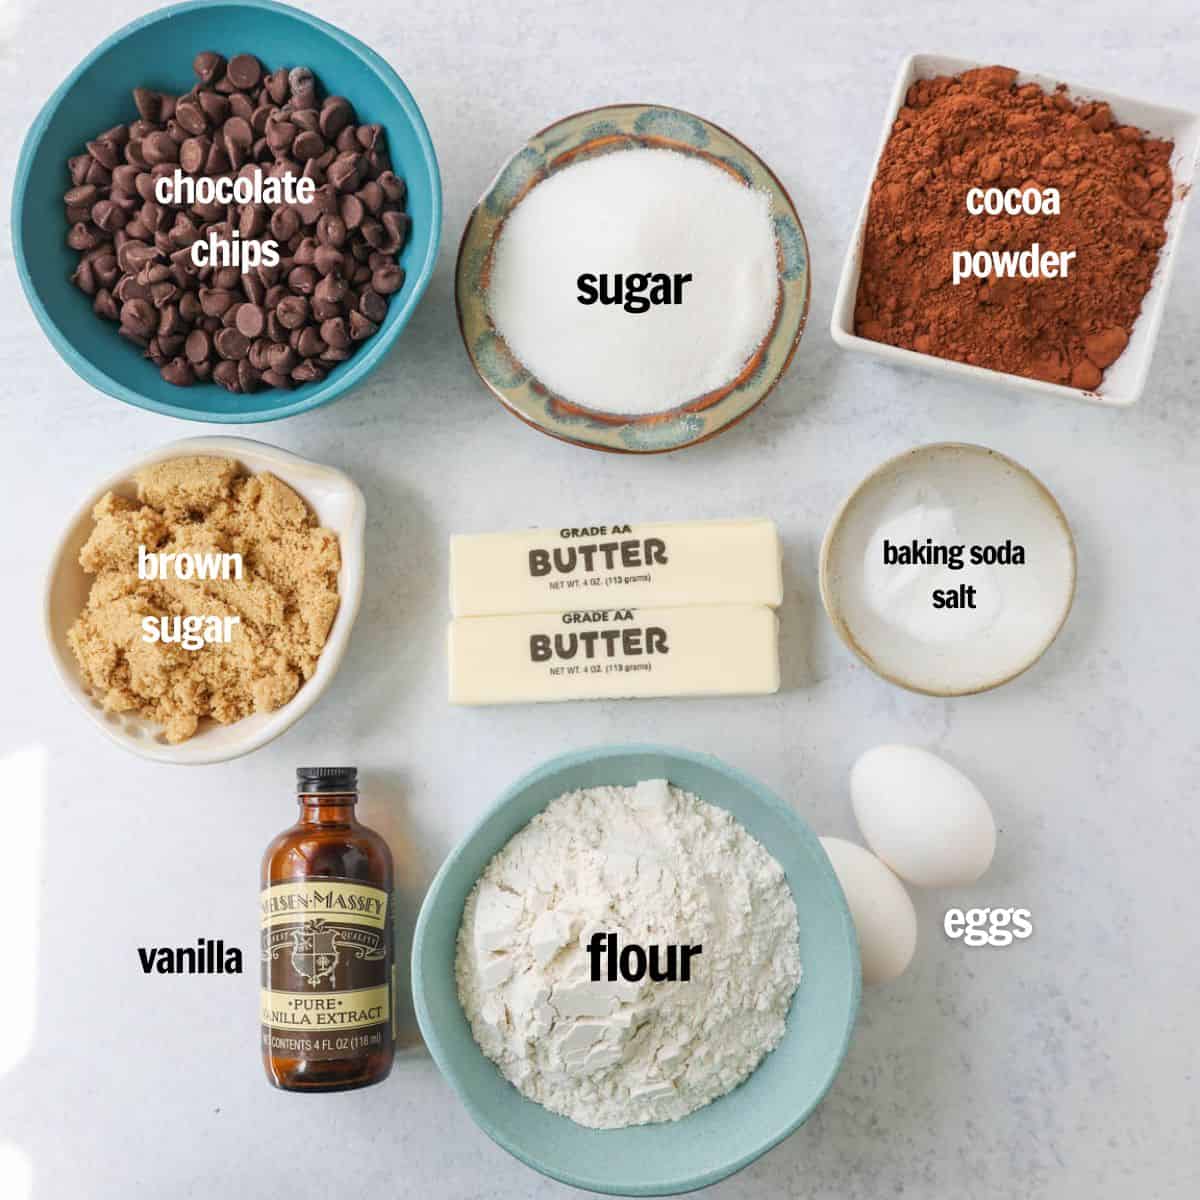 Double Chocolate Chocolate Chip Cookies Ingredients